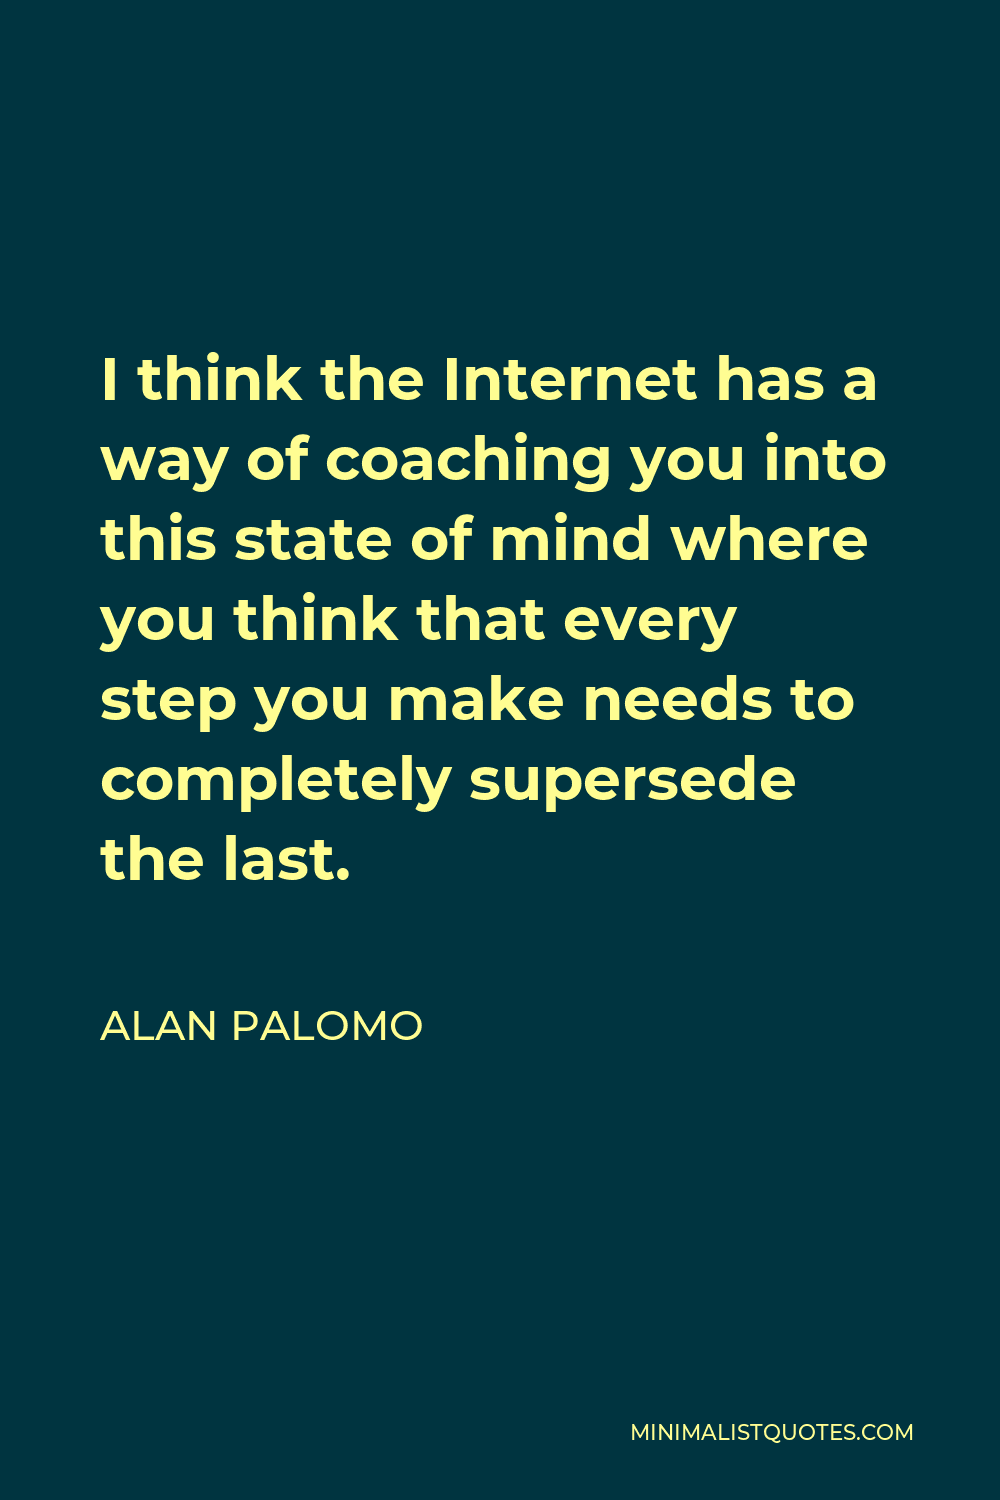 Alan Palomo Quote - I think the Internet has a way of coaching you into this state of mind where you think that every step you make needs to completely supersede the last.